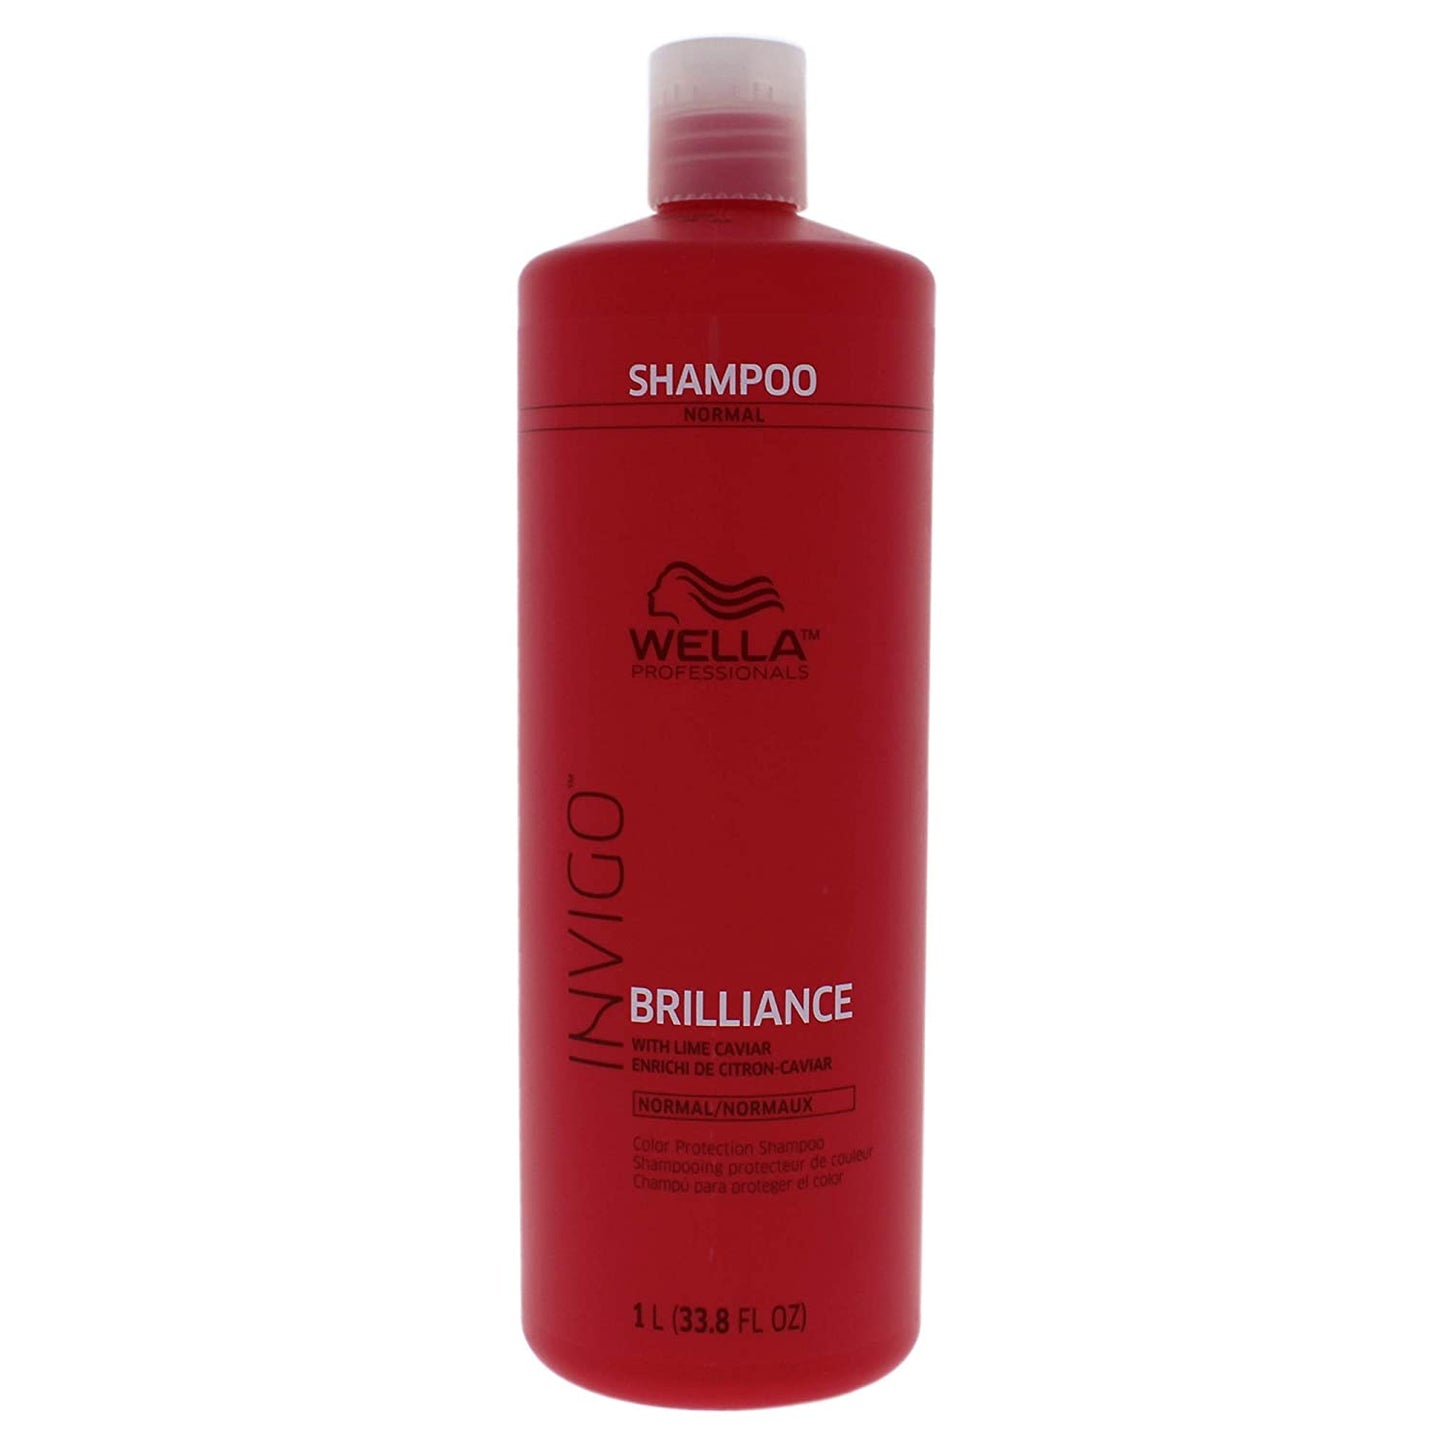 Wella Brilliance Shampoo for Normal Colored Hair